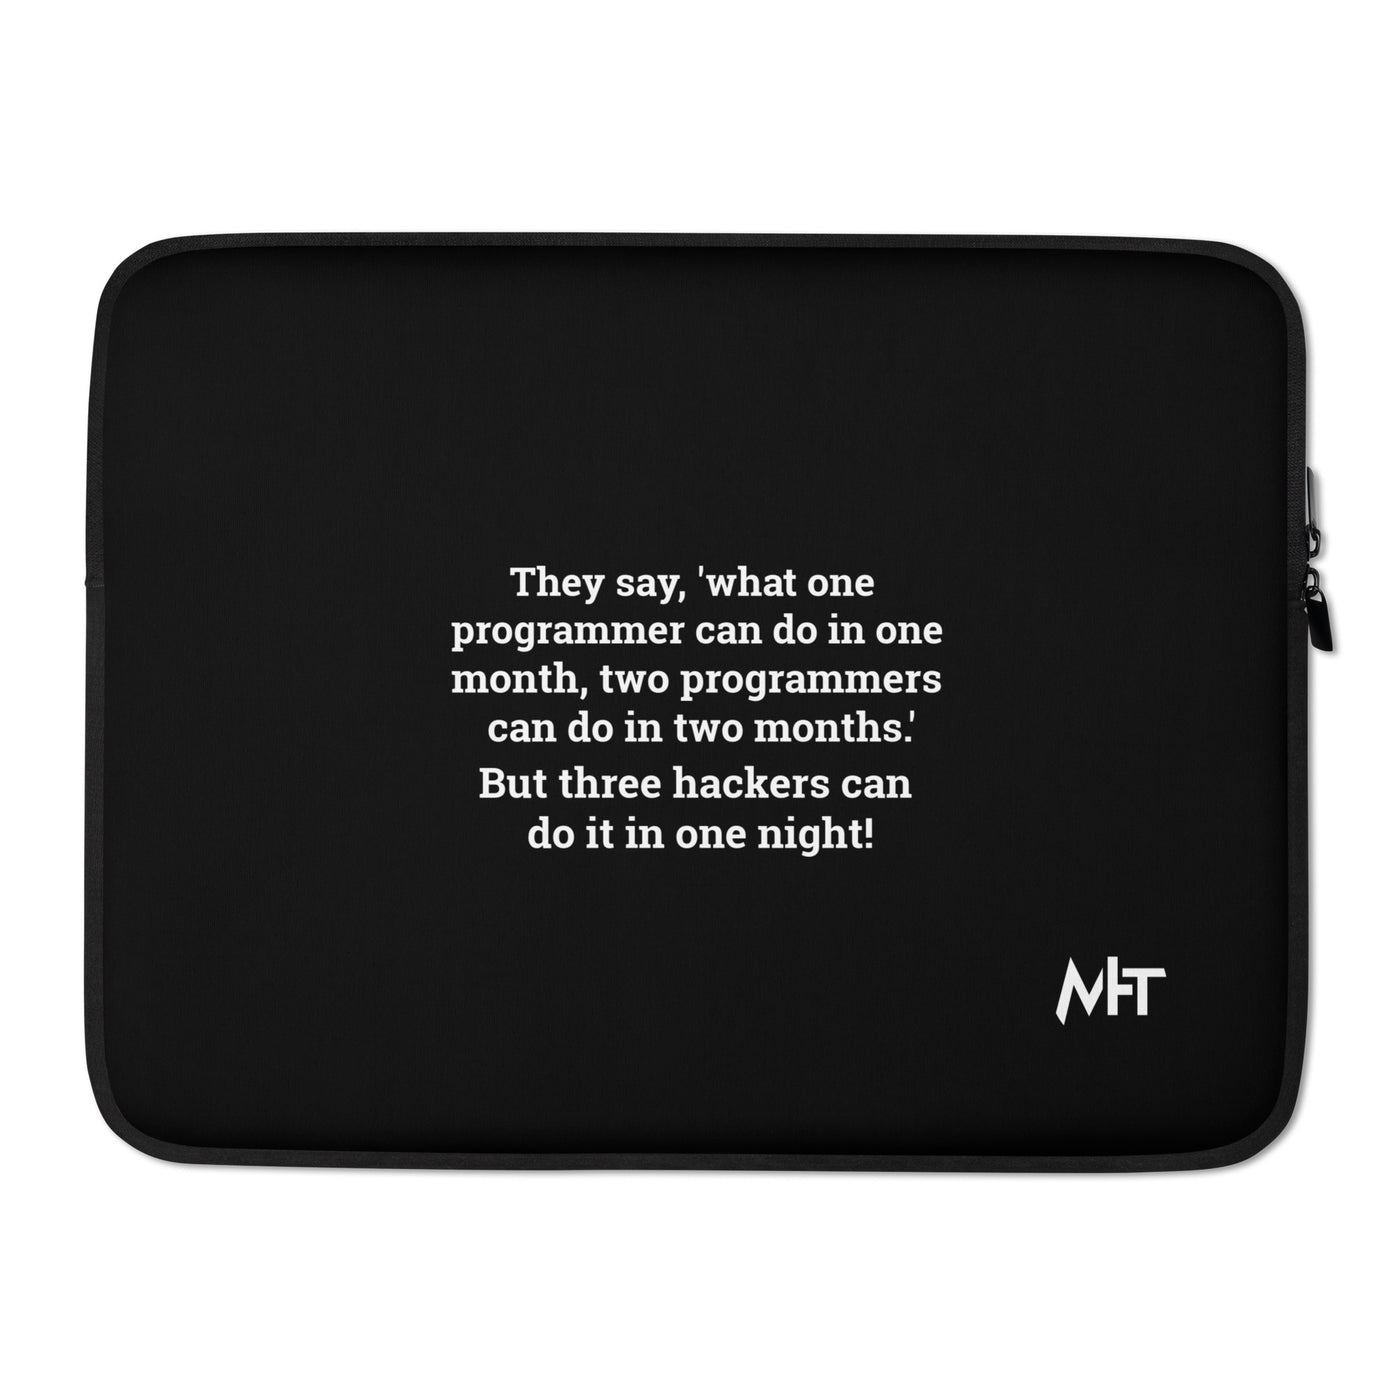 They say, what one programmer can do in one month - Laptop Sleeve